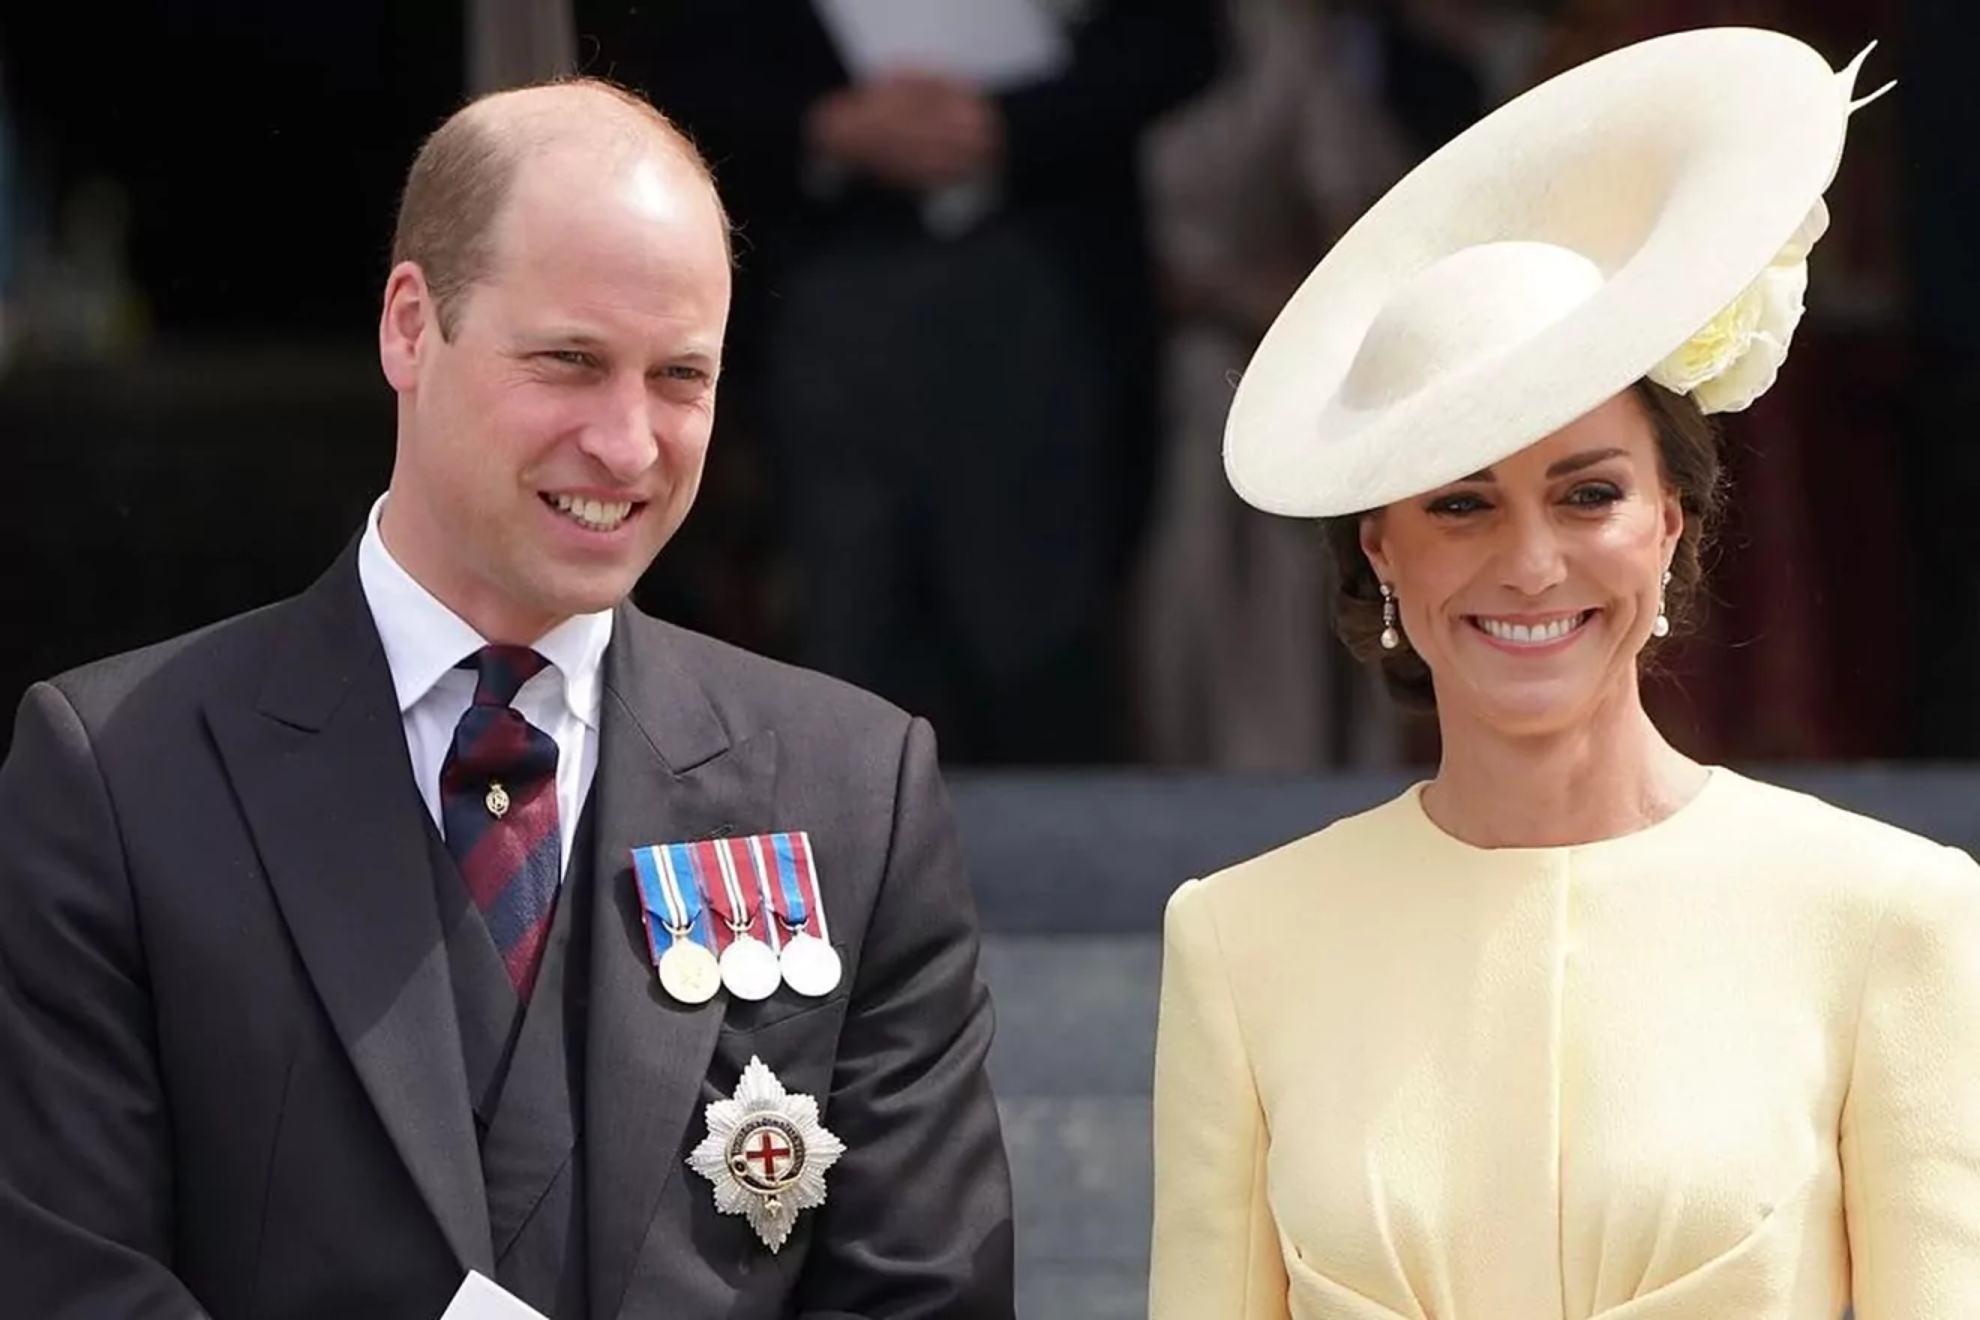 PRince William and Princess Kate at a public event.